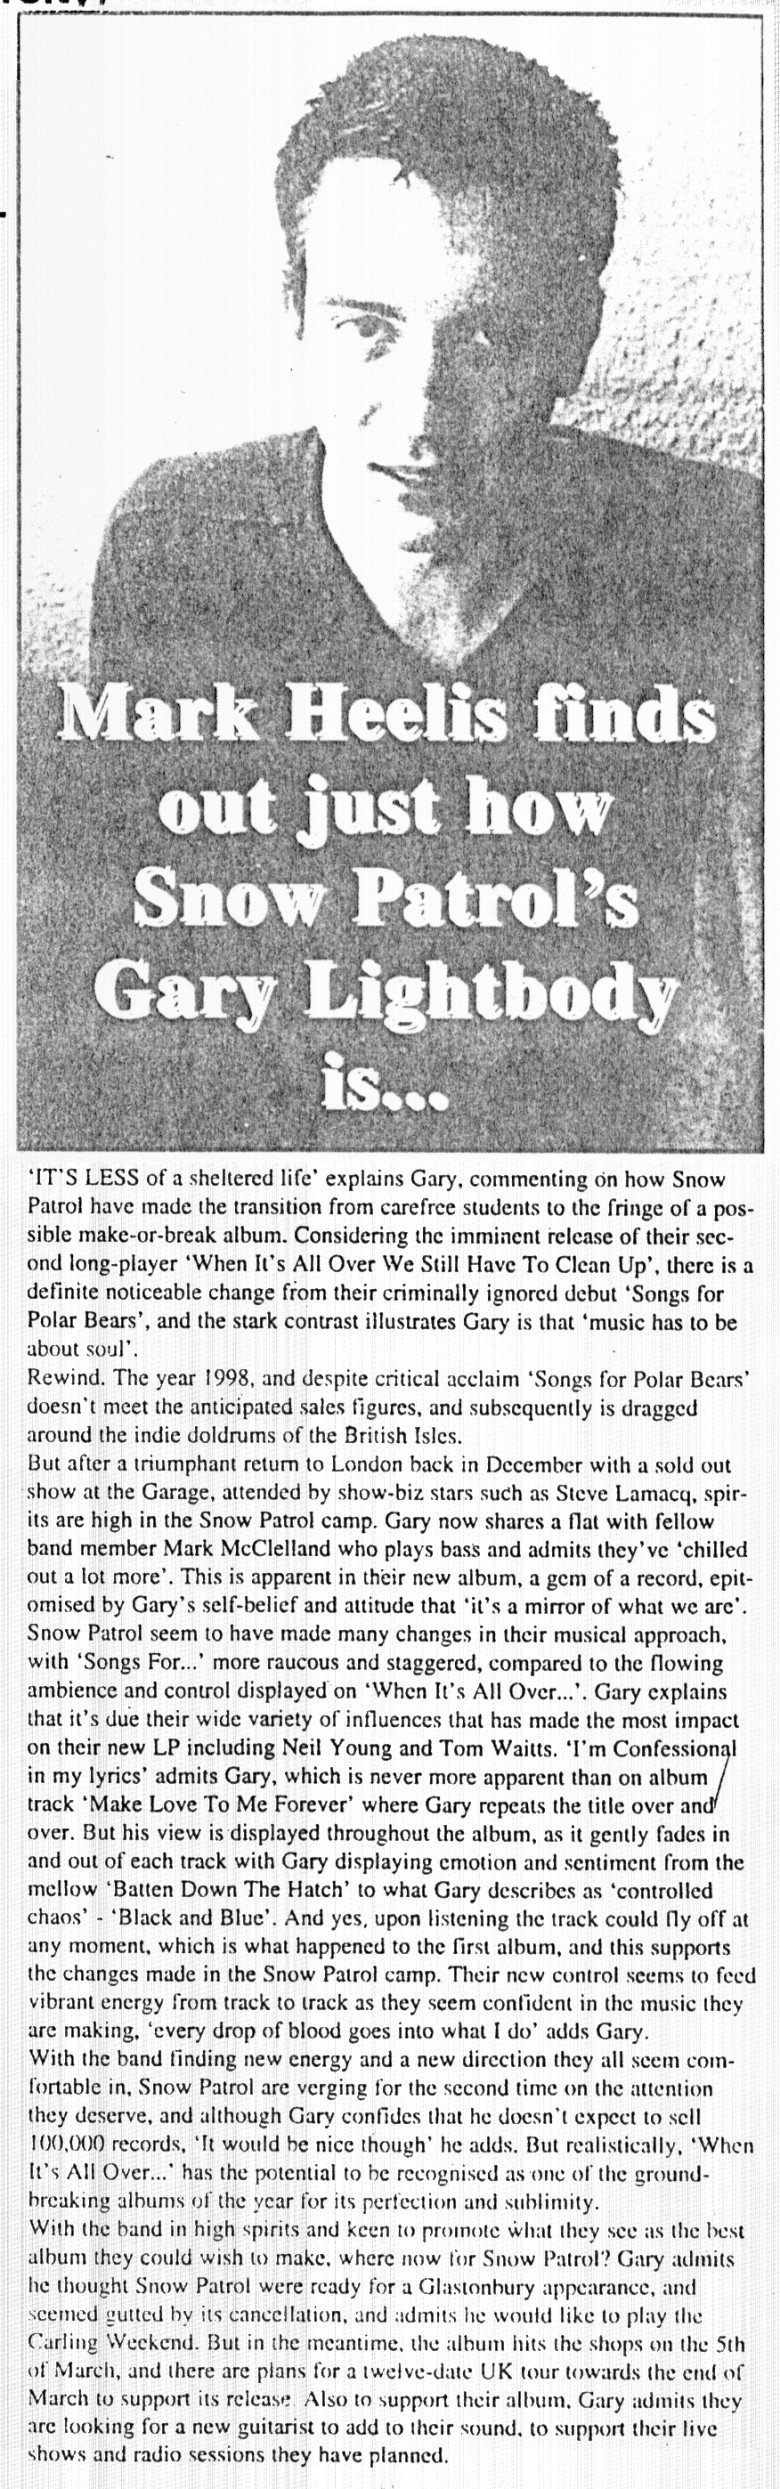 Spark (reading uni) - Mark Heelis Finds Out Just How Snow Patrol's Gary Lightbody is...